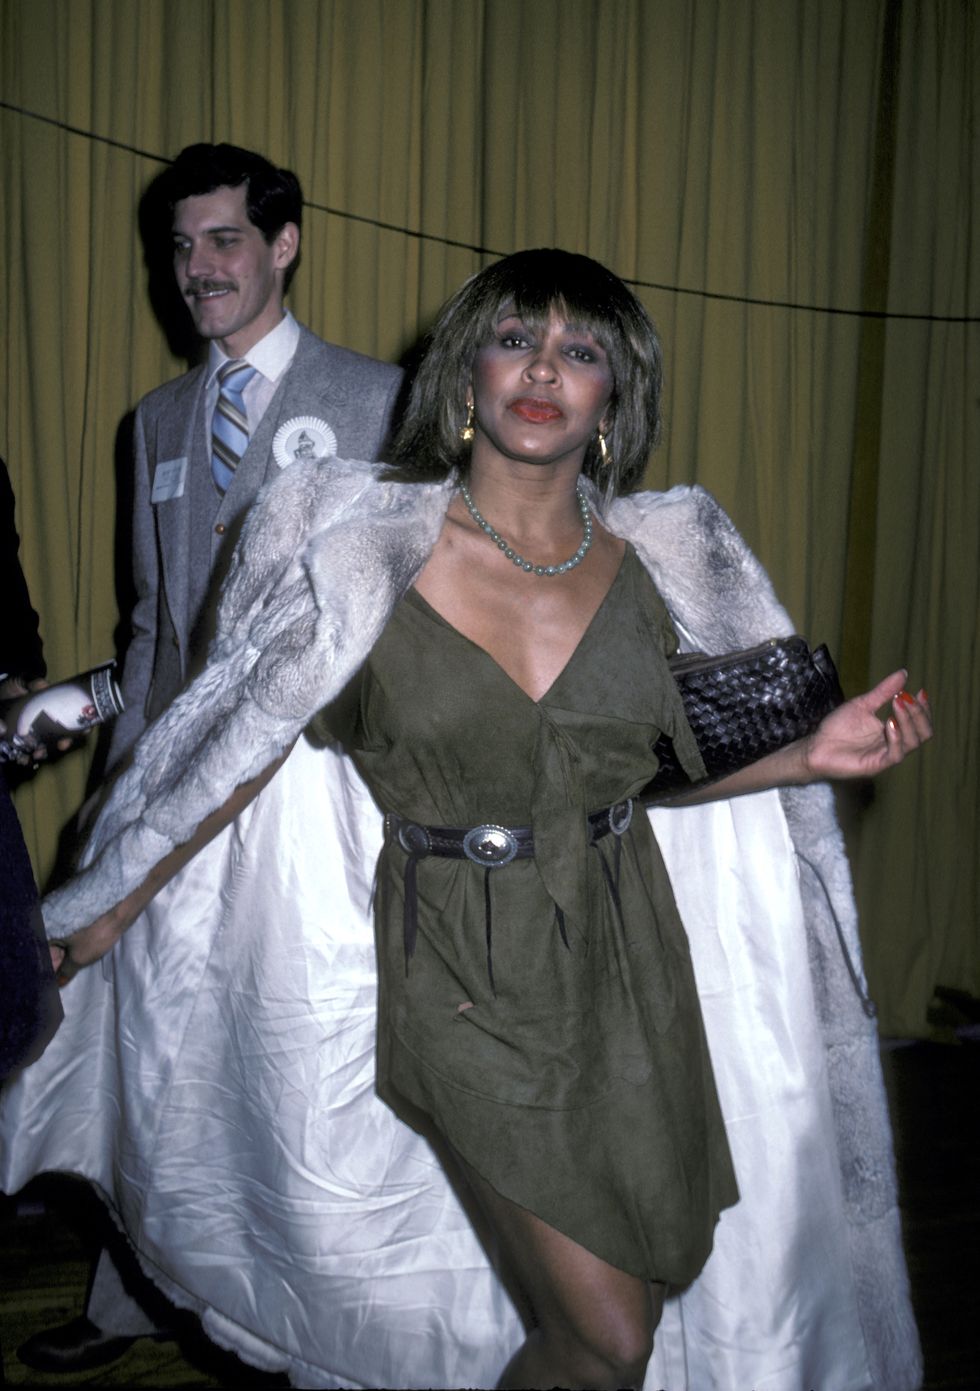 tina turner looks at the camera while standing in front of a man